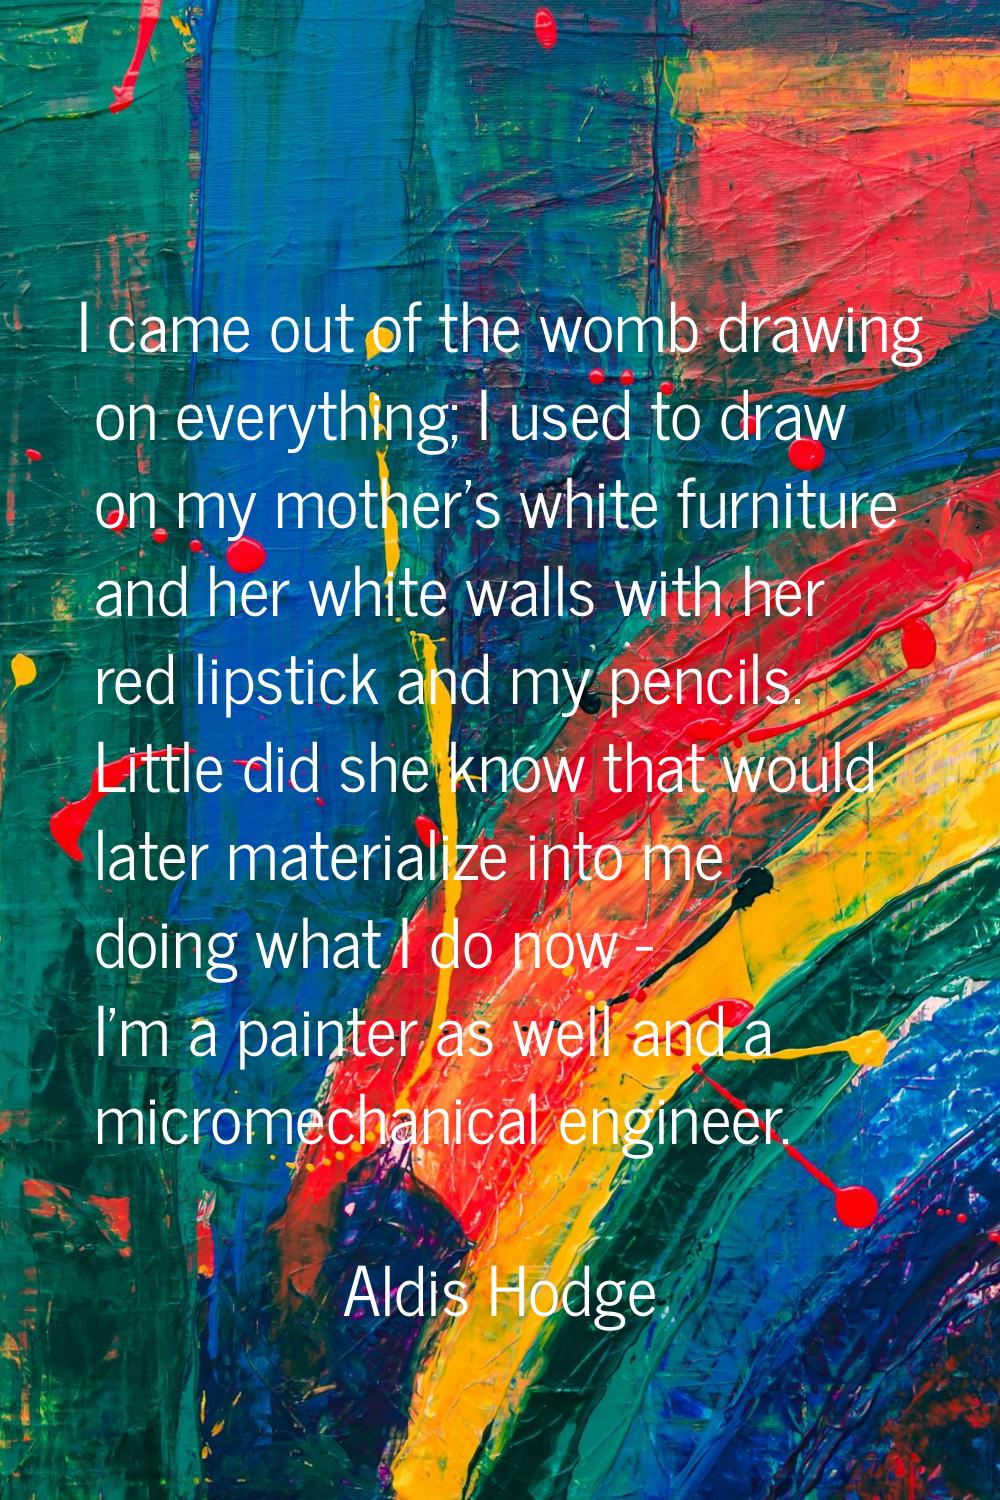 I came out of the womb drawing on everything; I used to draw on my mother's white furniture and her